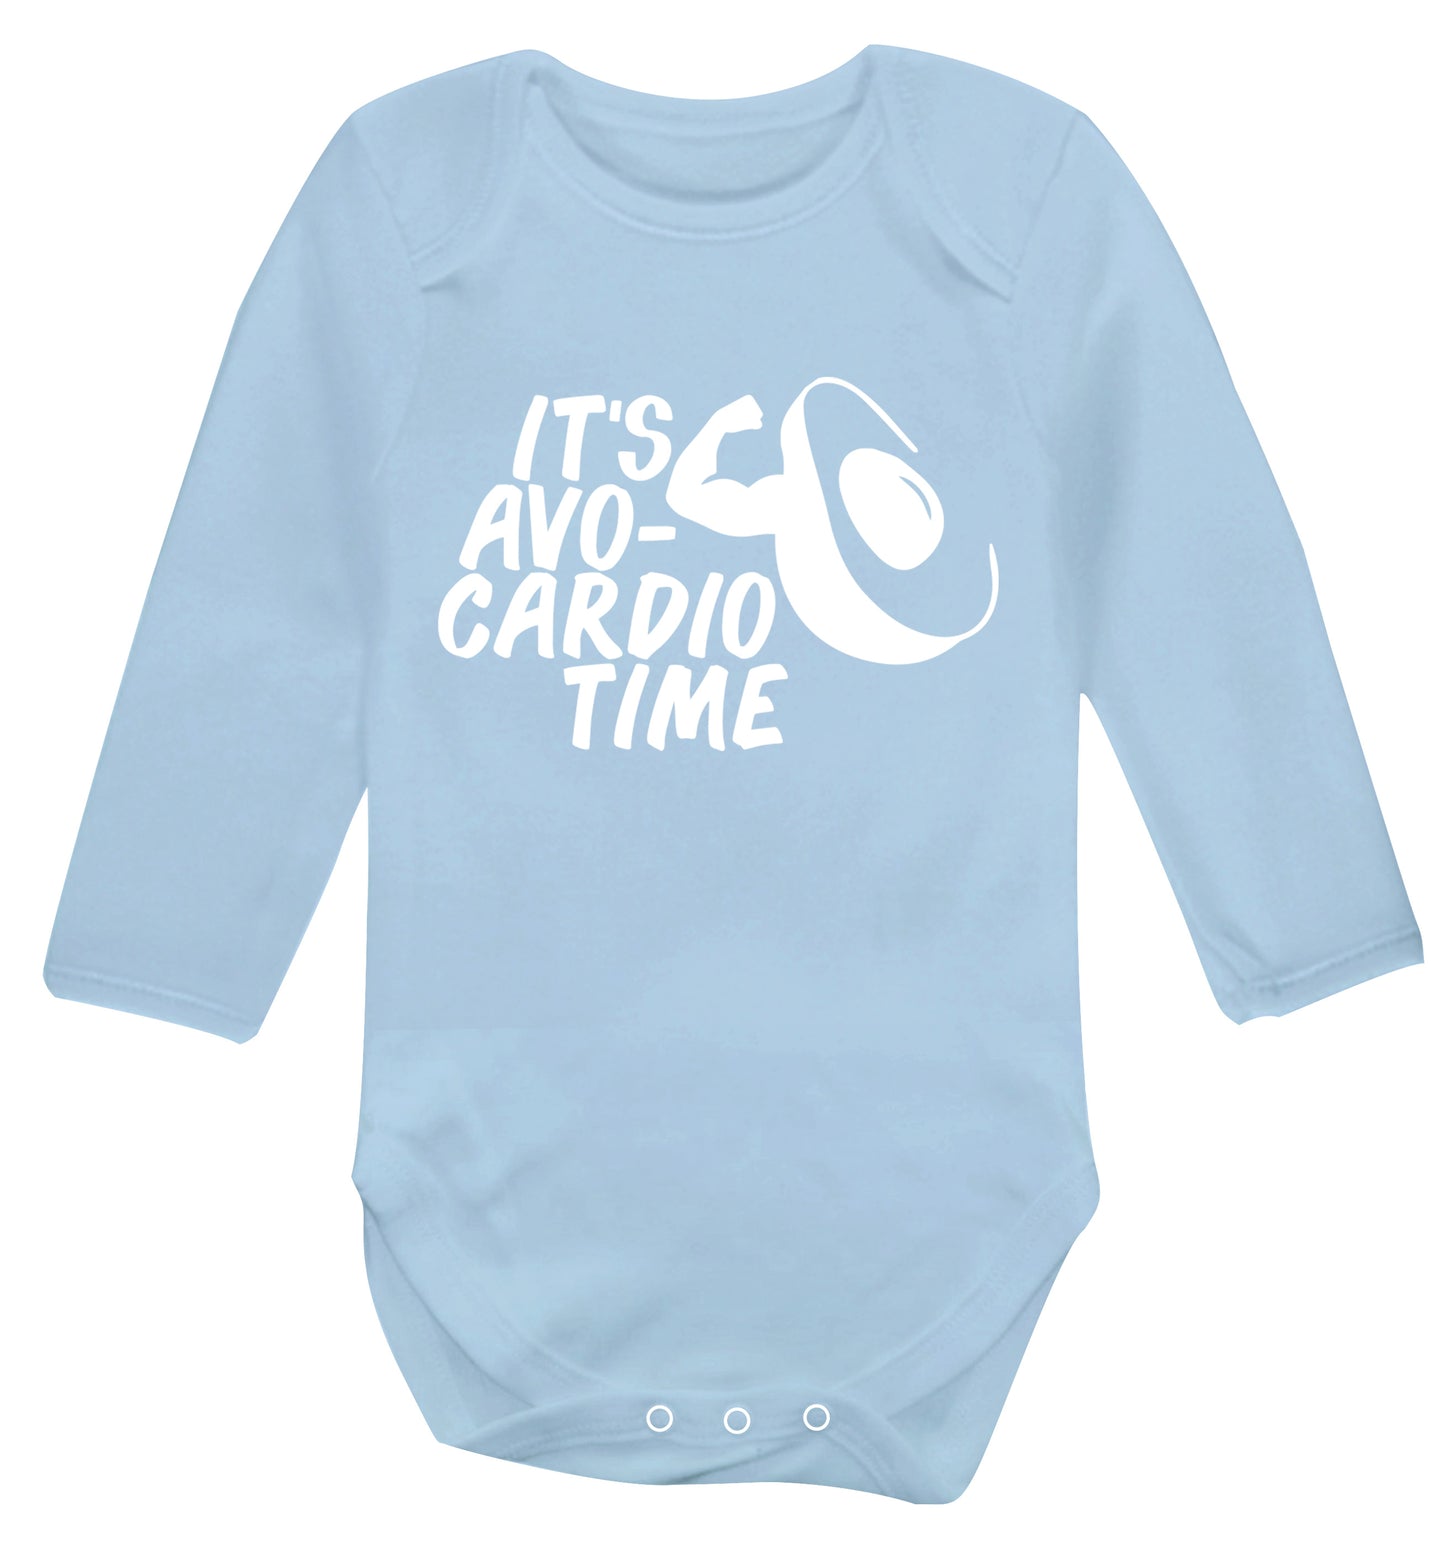 It's avo-cardio time Baby Vest long sleeved pale blue 6-12 months